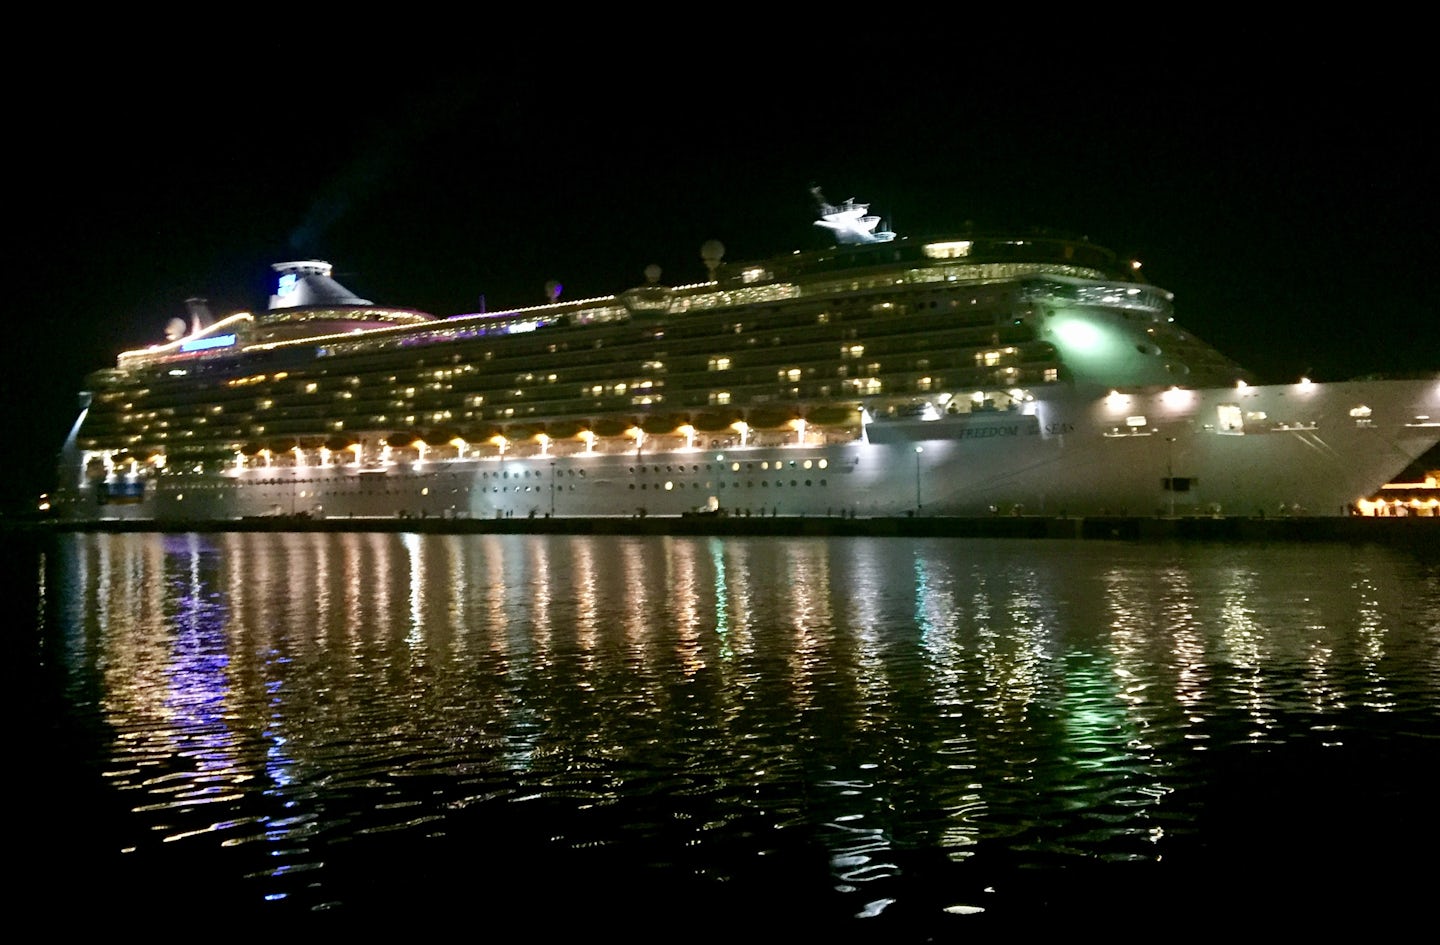 Always get a lump in my throat when I see our ship by night. Awesomeness never ceases to amaze